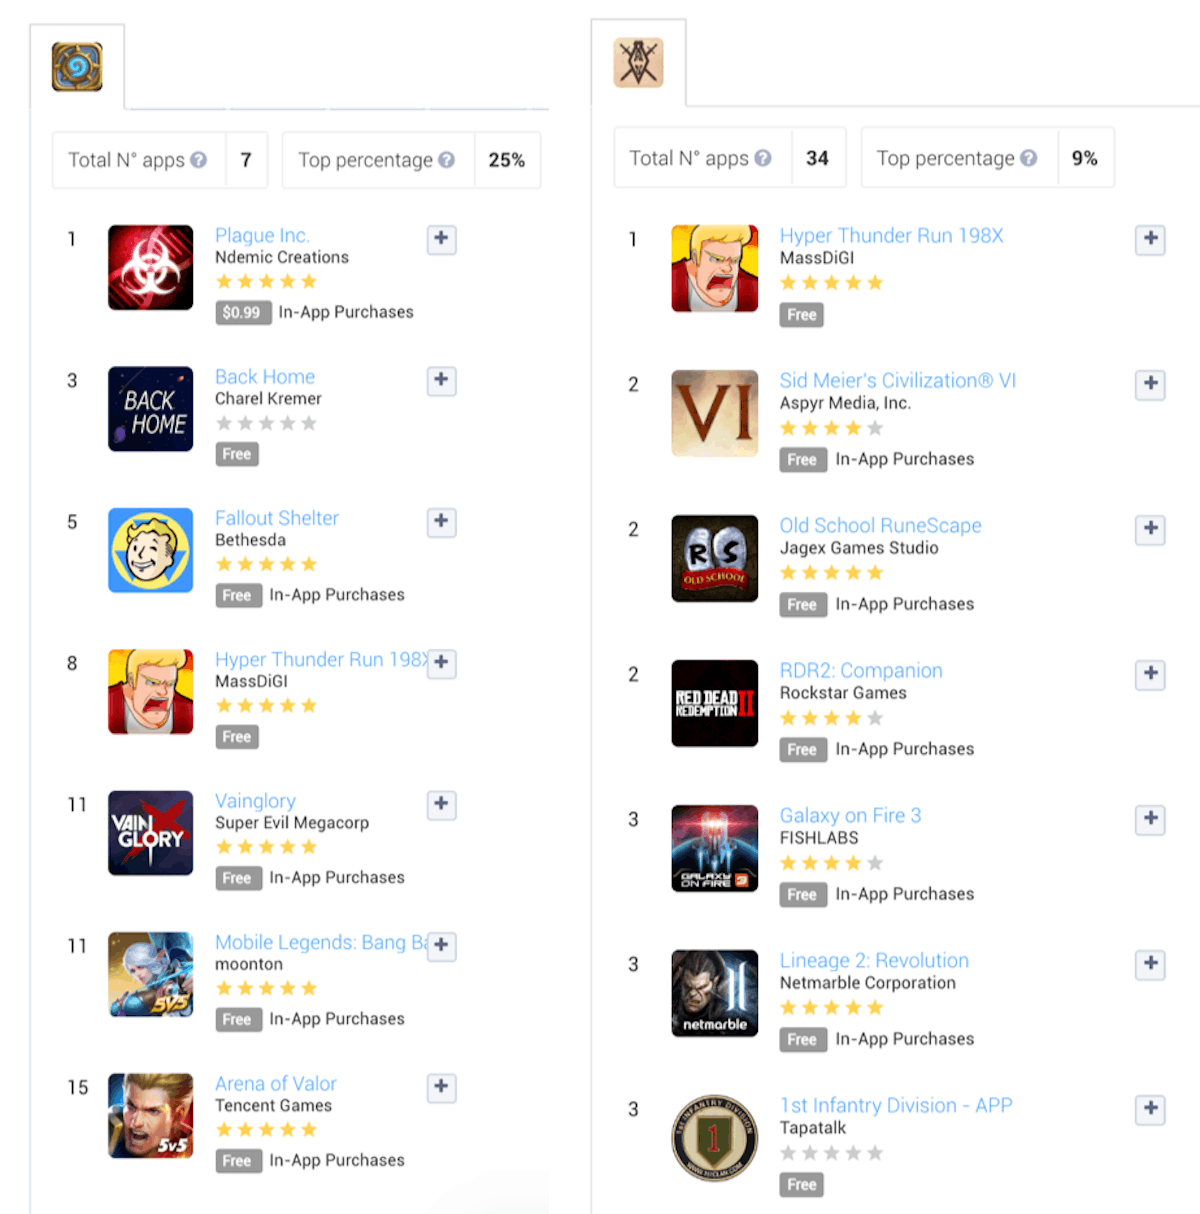 Comparing the number of apps that point towards Hearthstone vs. The Elder Scrolls in the “You May Also Like” section of the Apple App Store (United States)